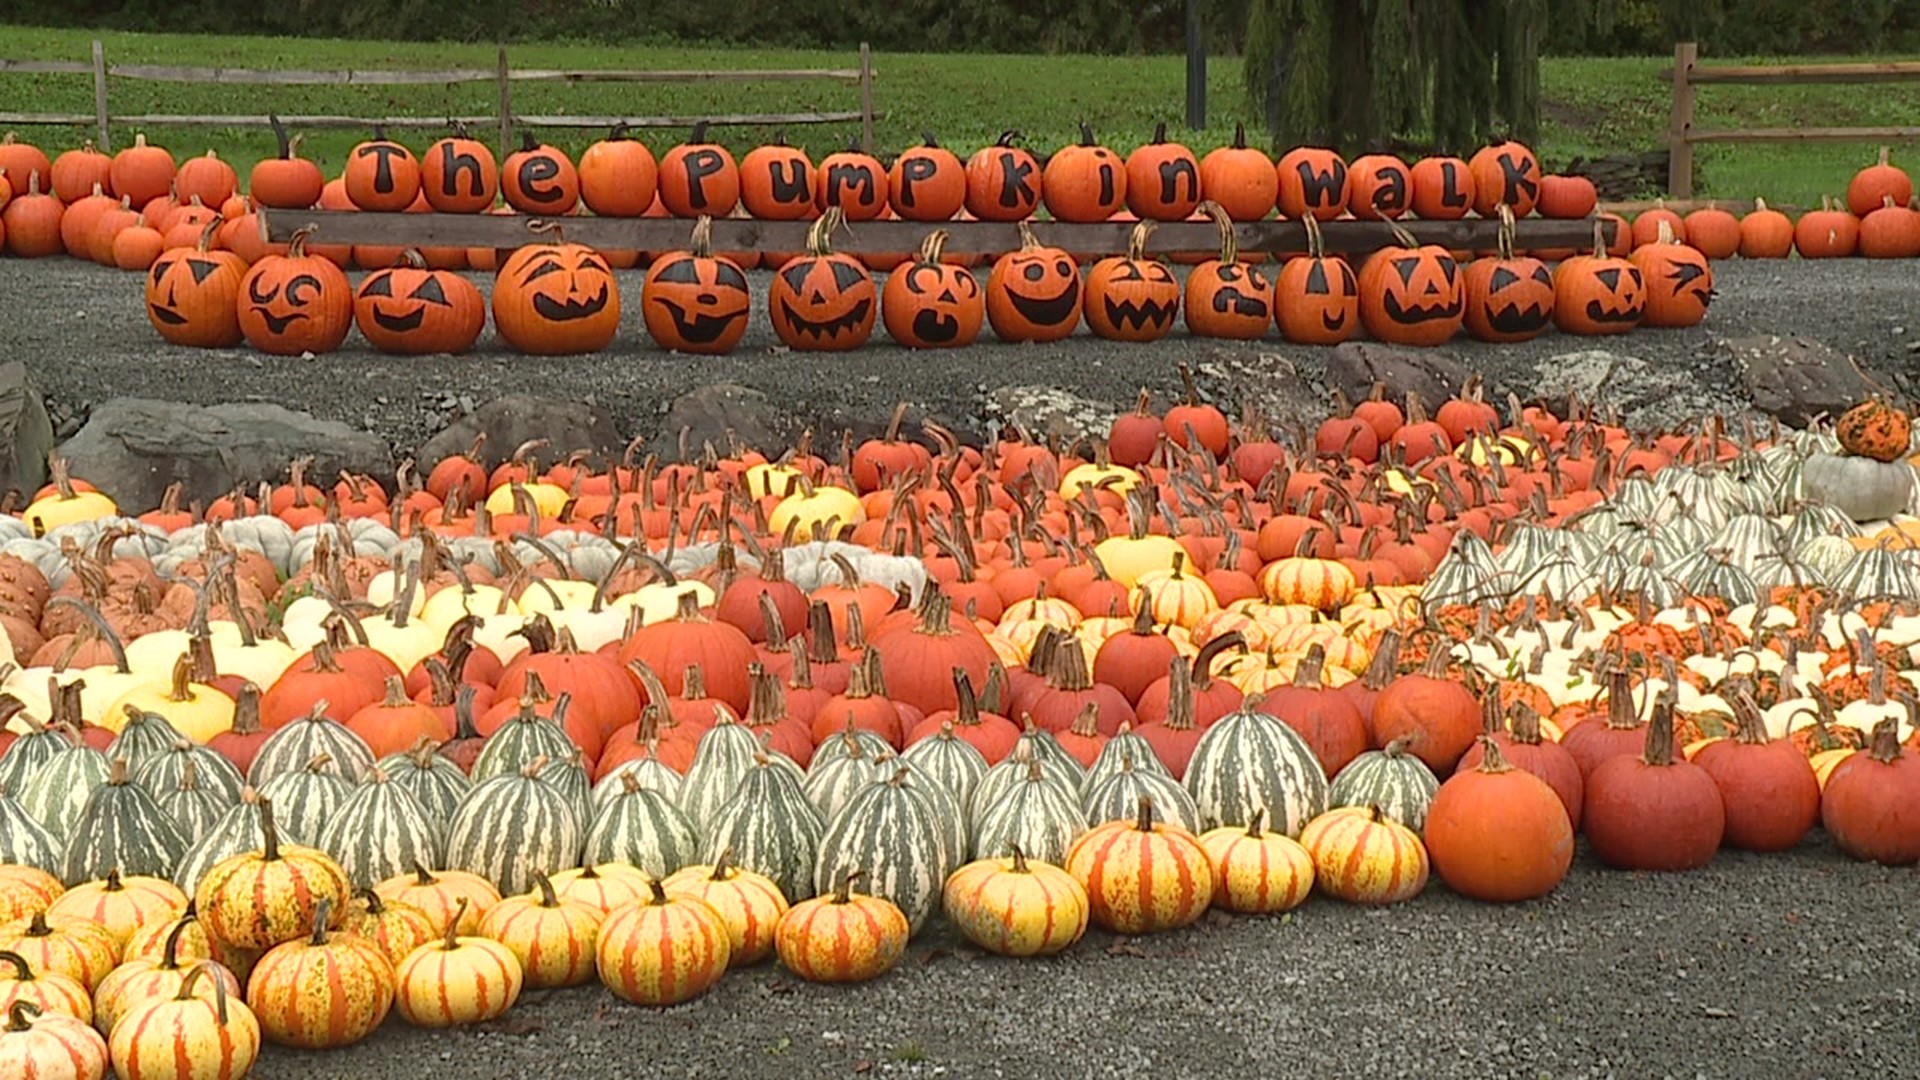 Jon Meyer took the Pennsylvania Road to Creekside Gardens in Wyoming County using thousands of pumpkins themselves to create artwork.